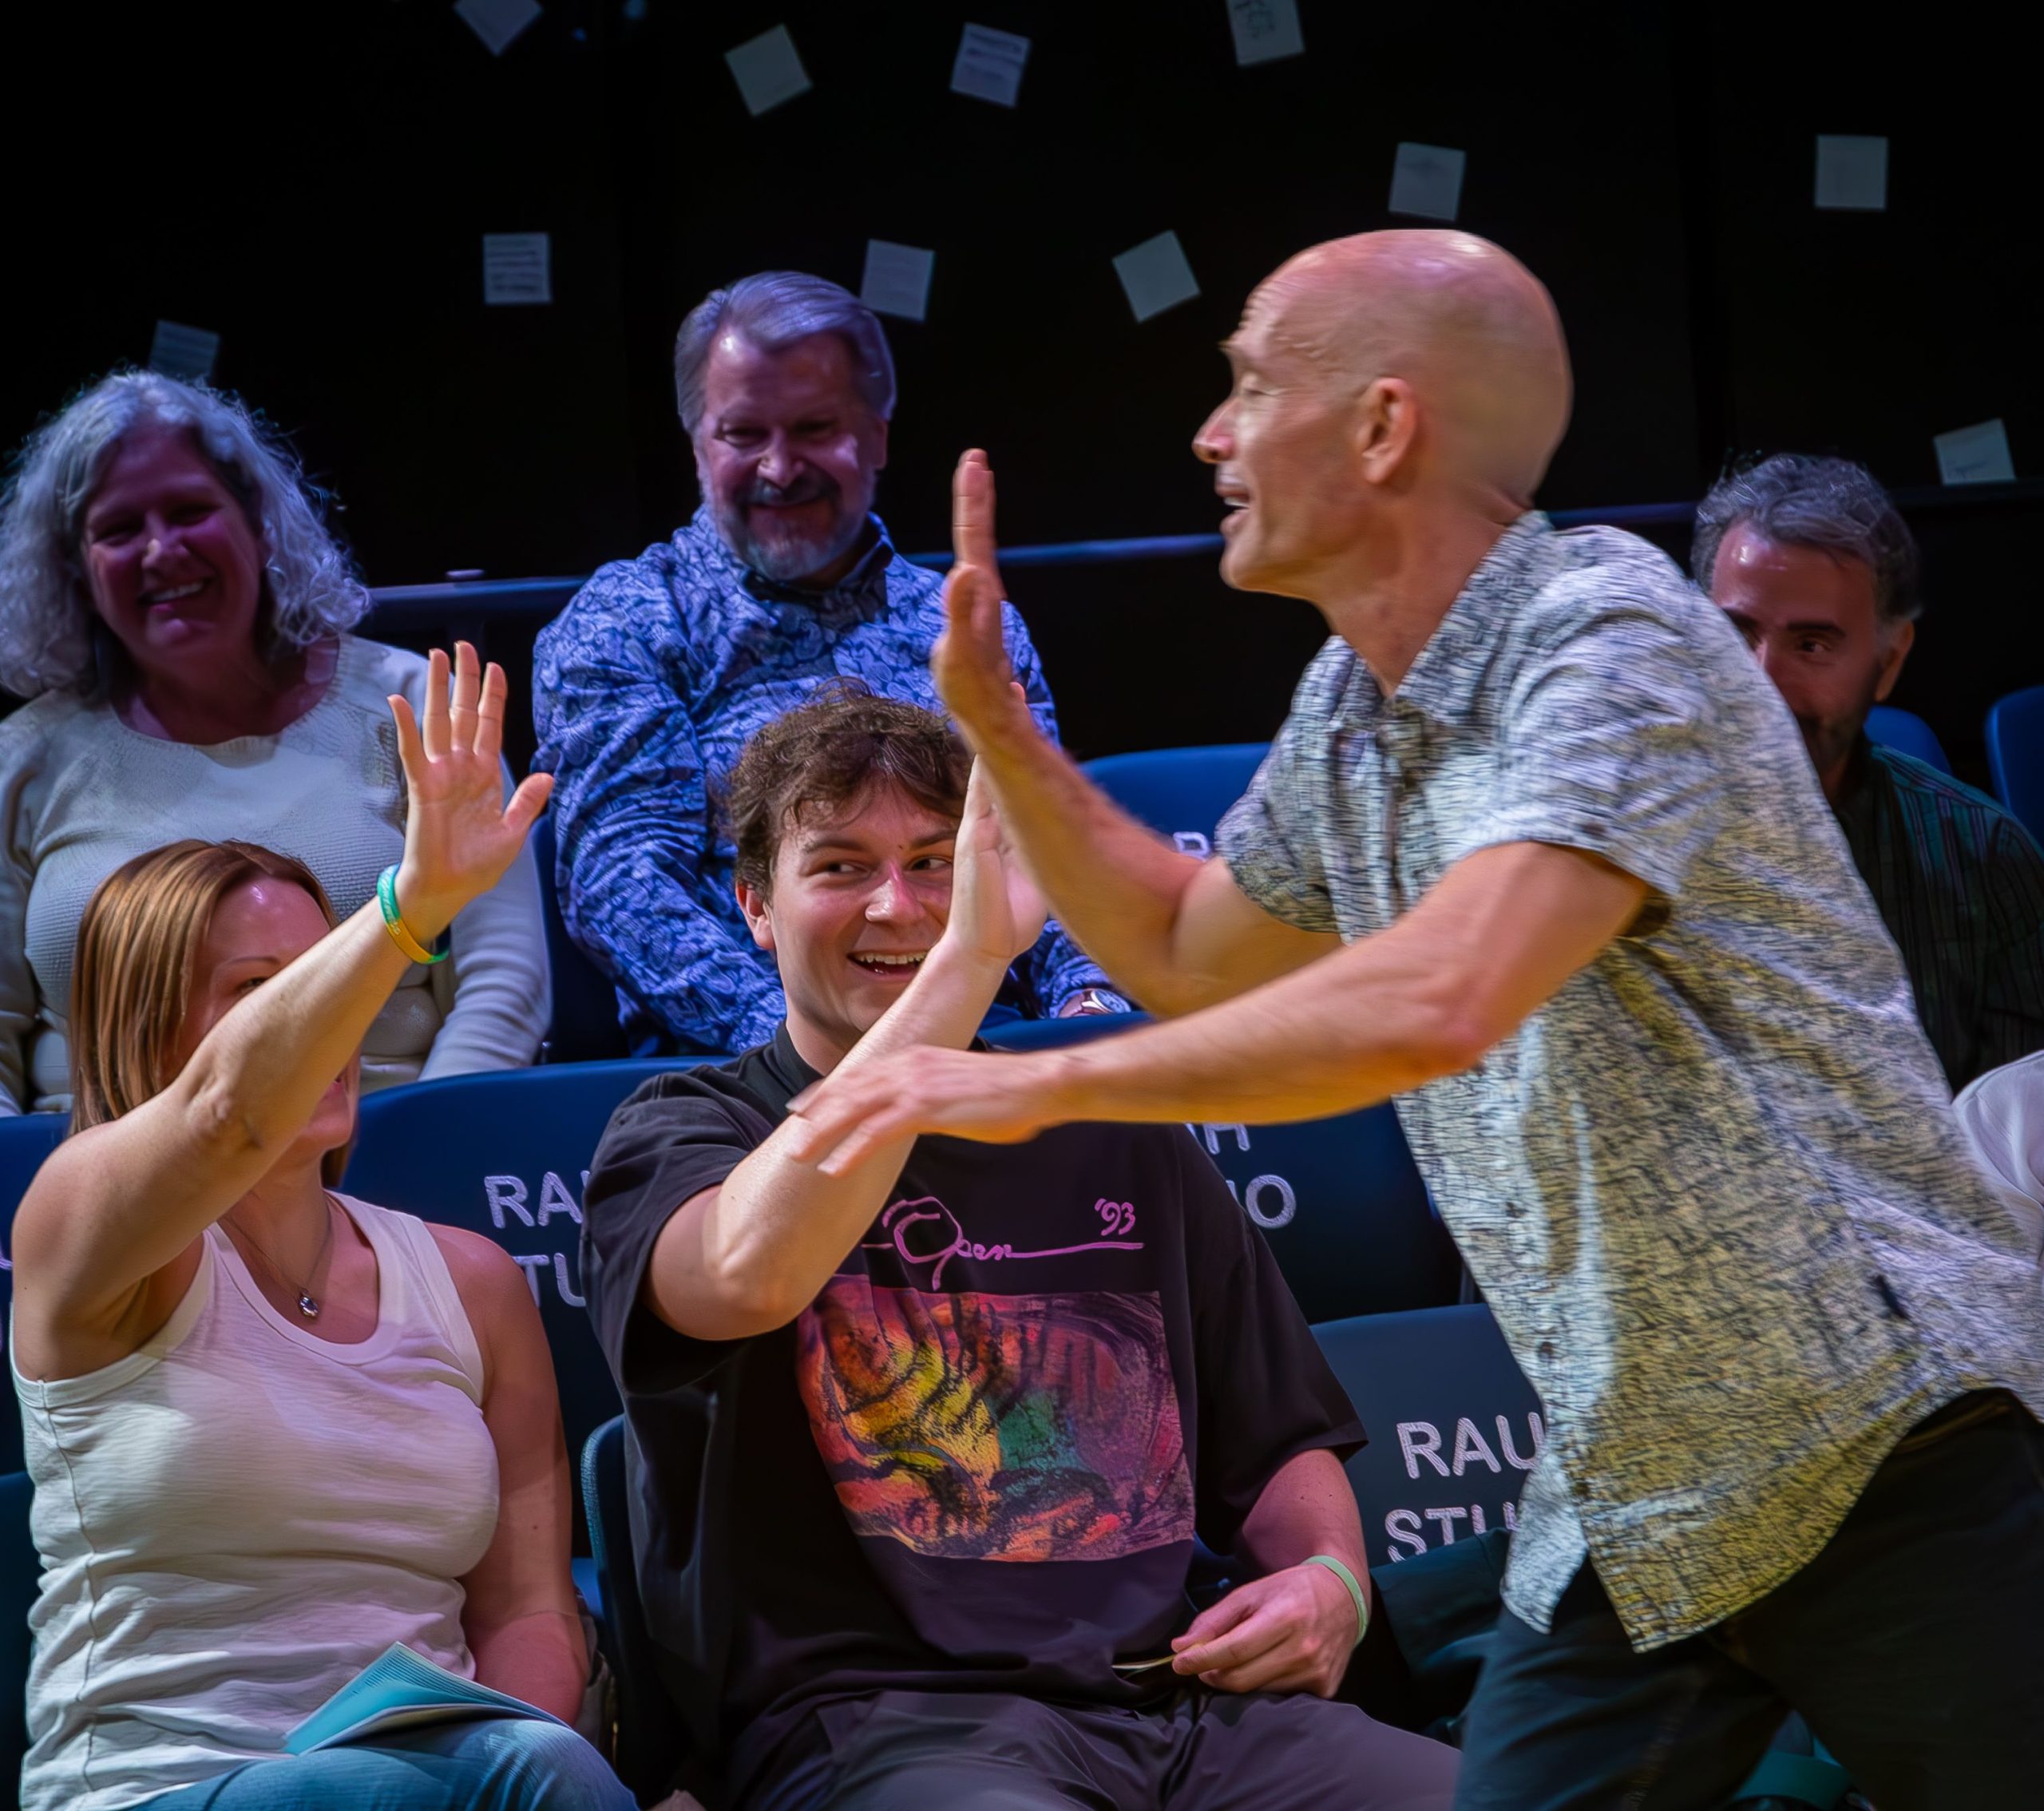 Performer Marcus Weiss turns a one-man show into an all-hands celebration in 'Every Brilliant Thing.' (Photo: Rocky Raco)